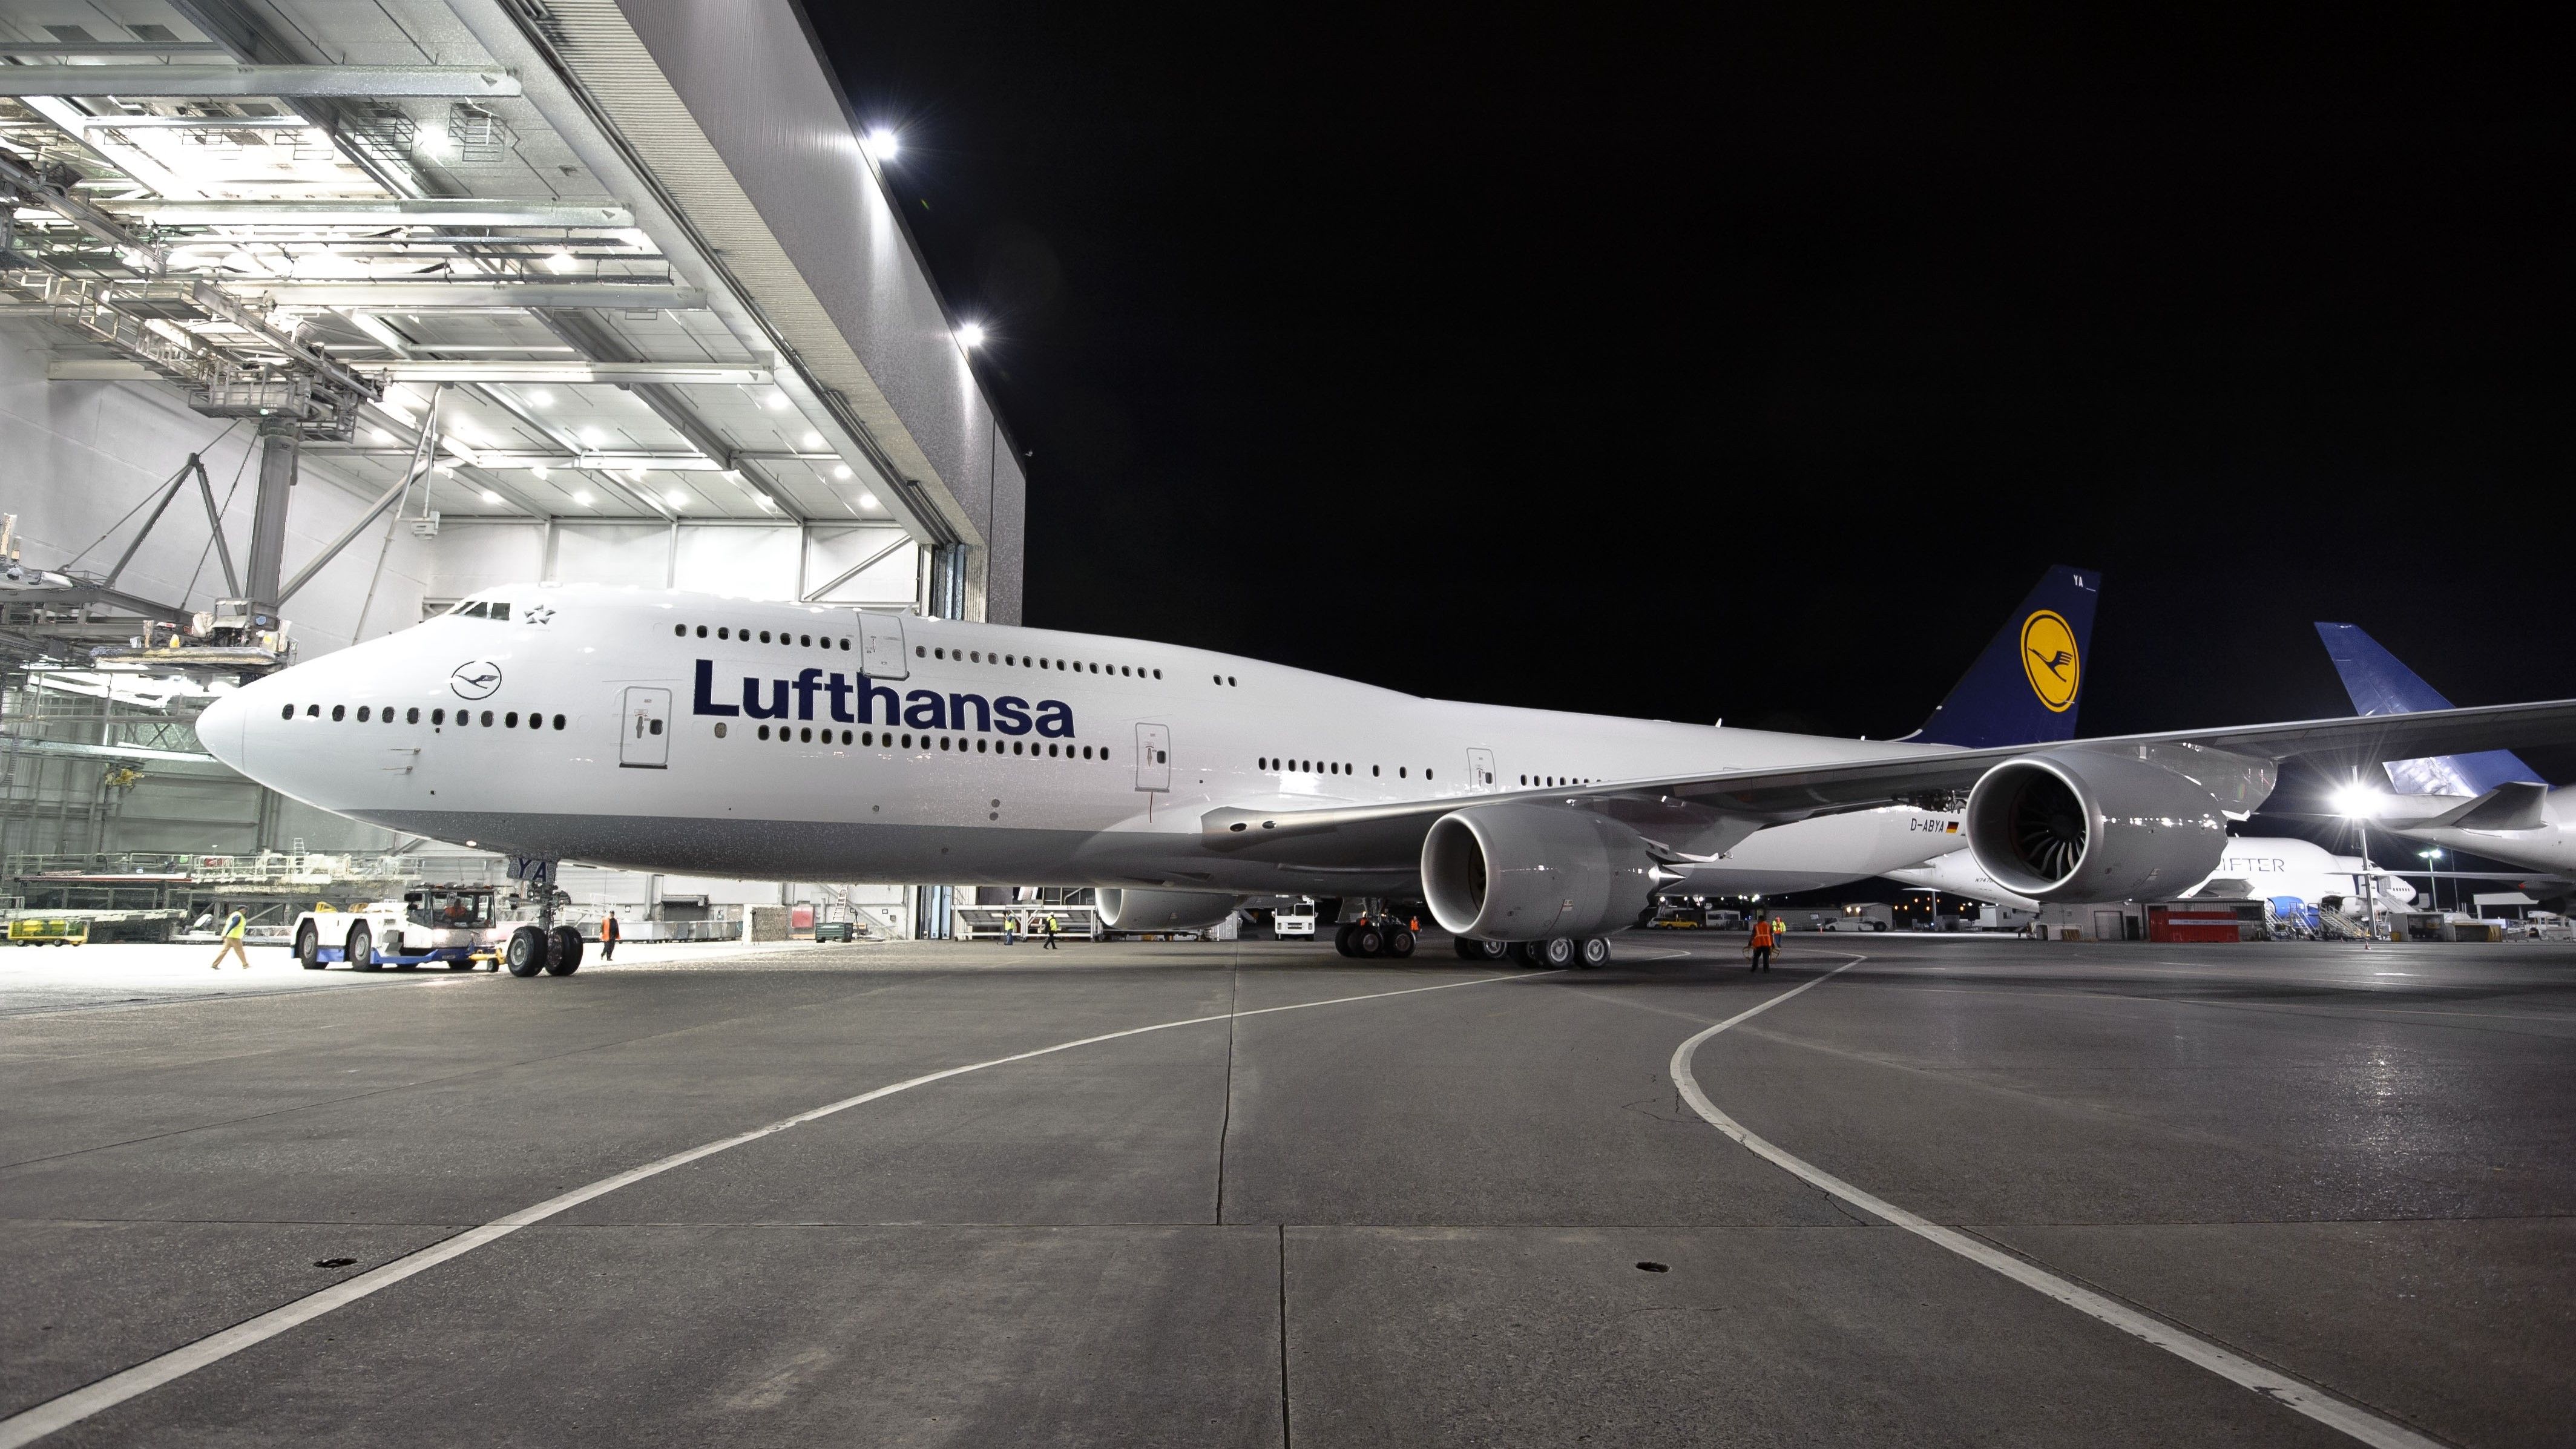 A Lufthansa Boeing 747-8 Being Pushed Out Of A Hangar At Night.